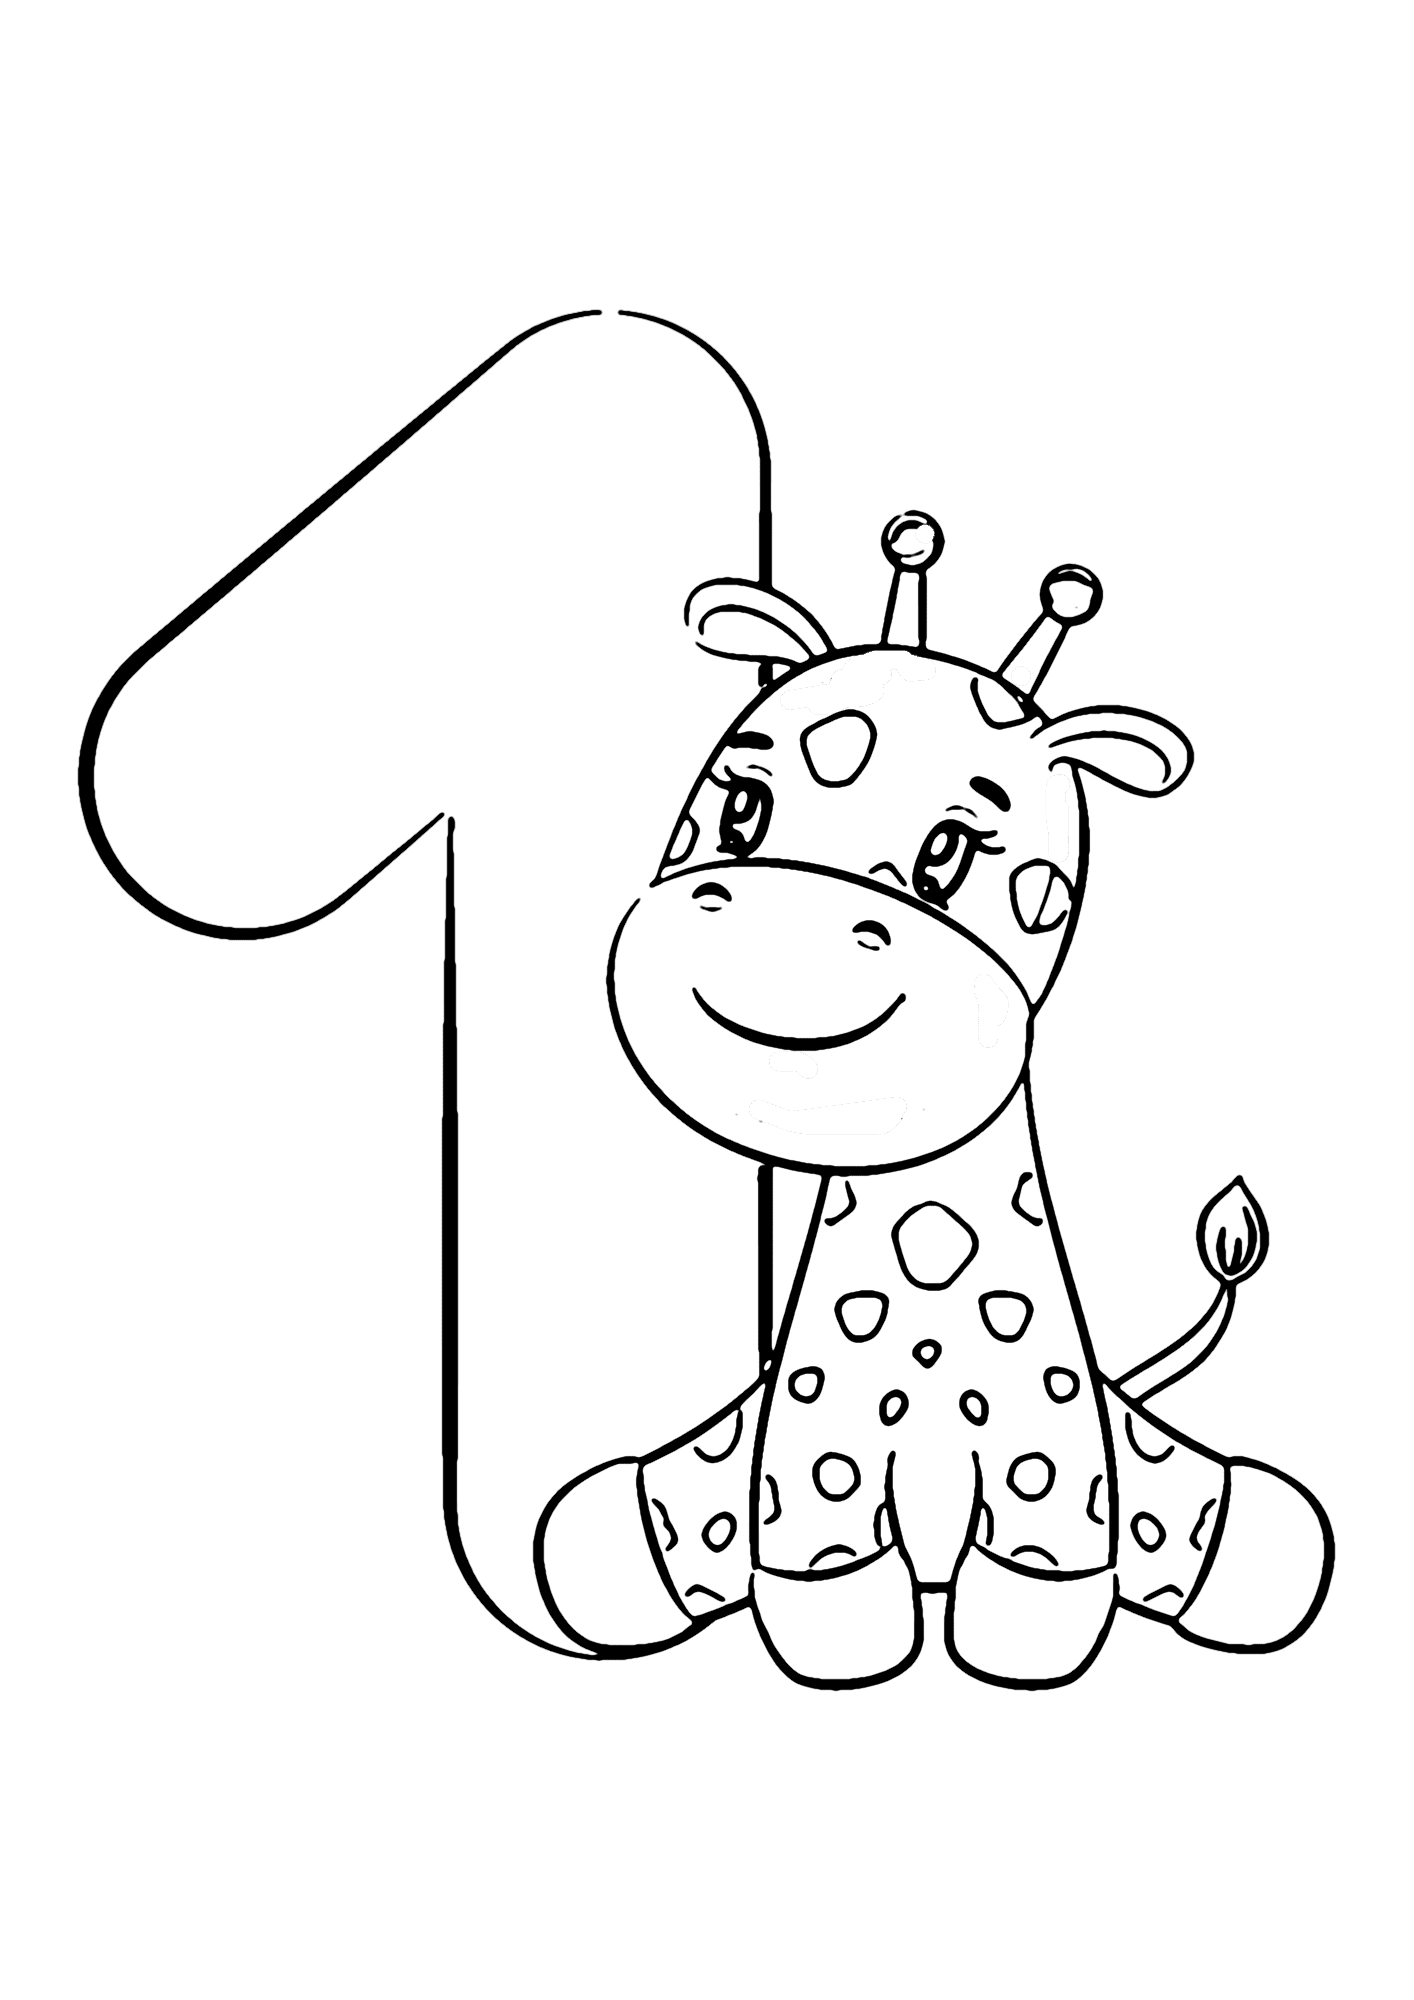 Giraffe Picture For Children Coloring Page